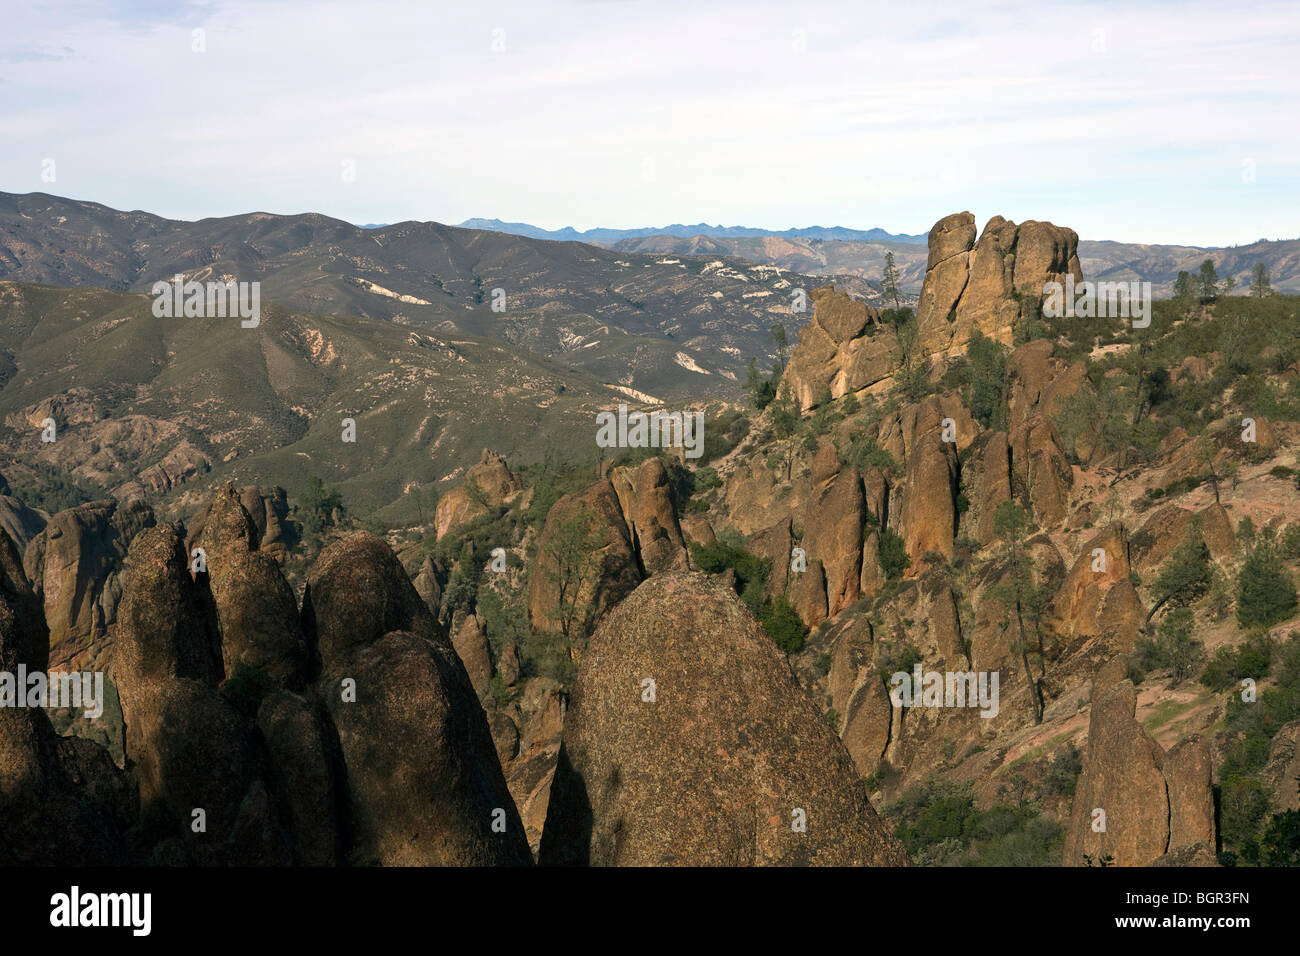 View of rock formations along the High Peaks Trail at High Peaks, Pinnacles National Monument, California Stock Photo